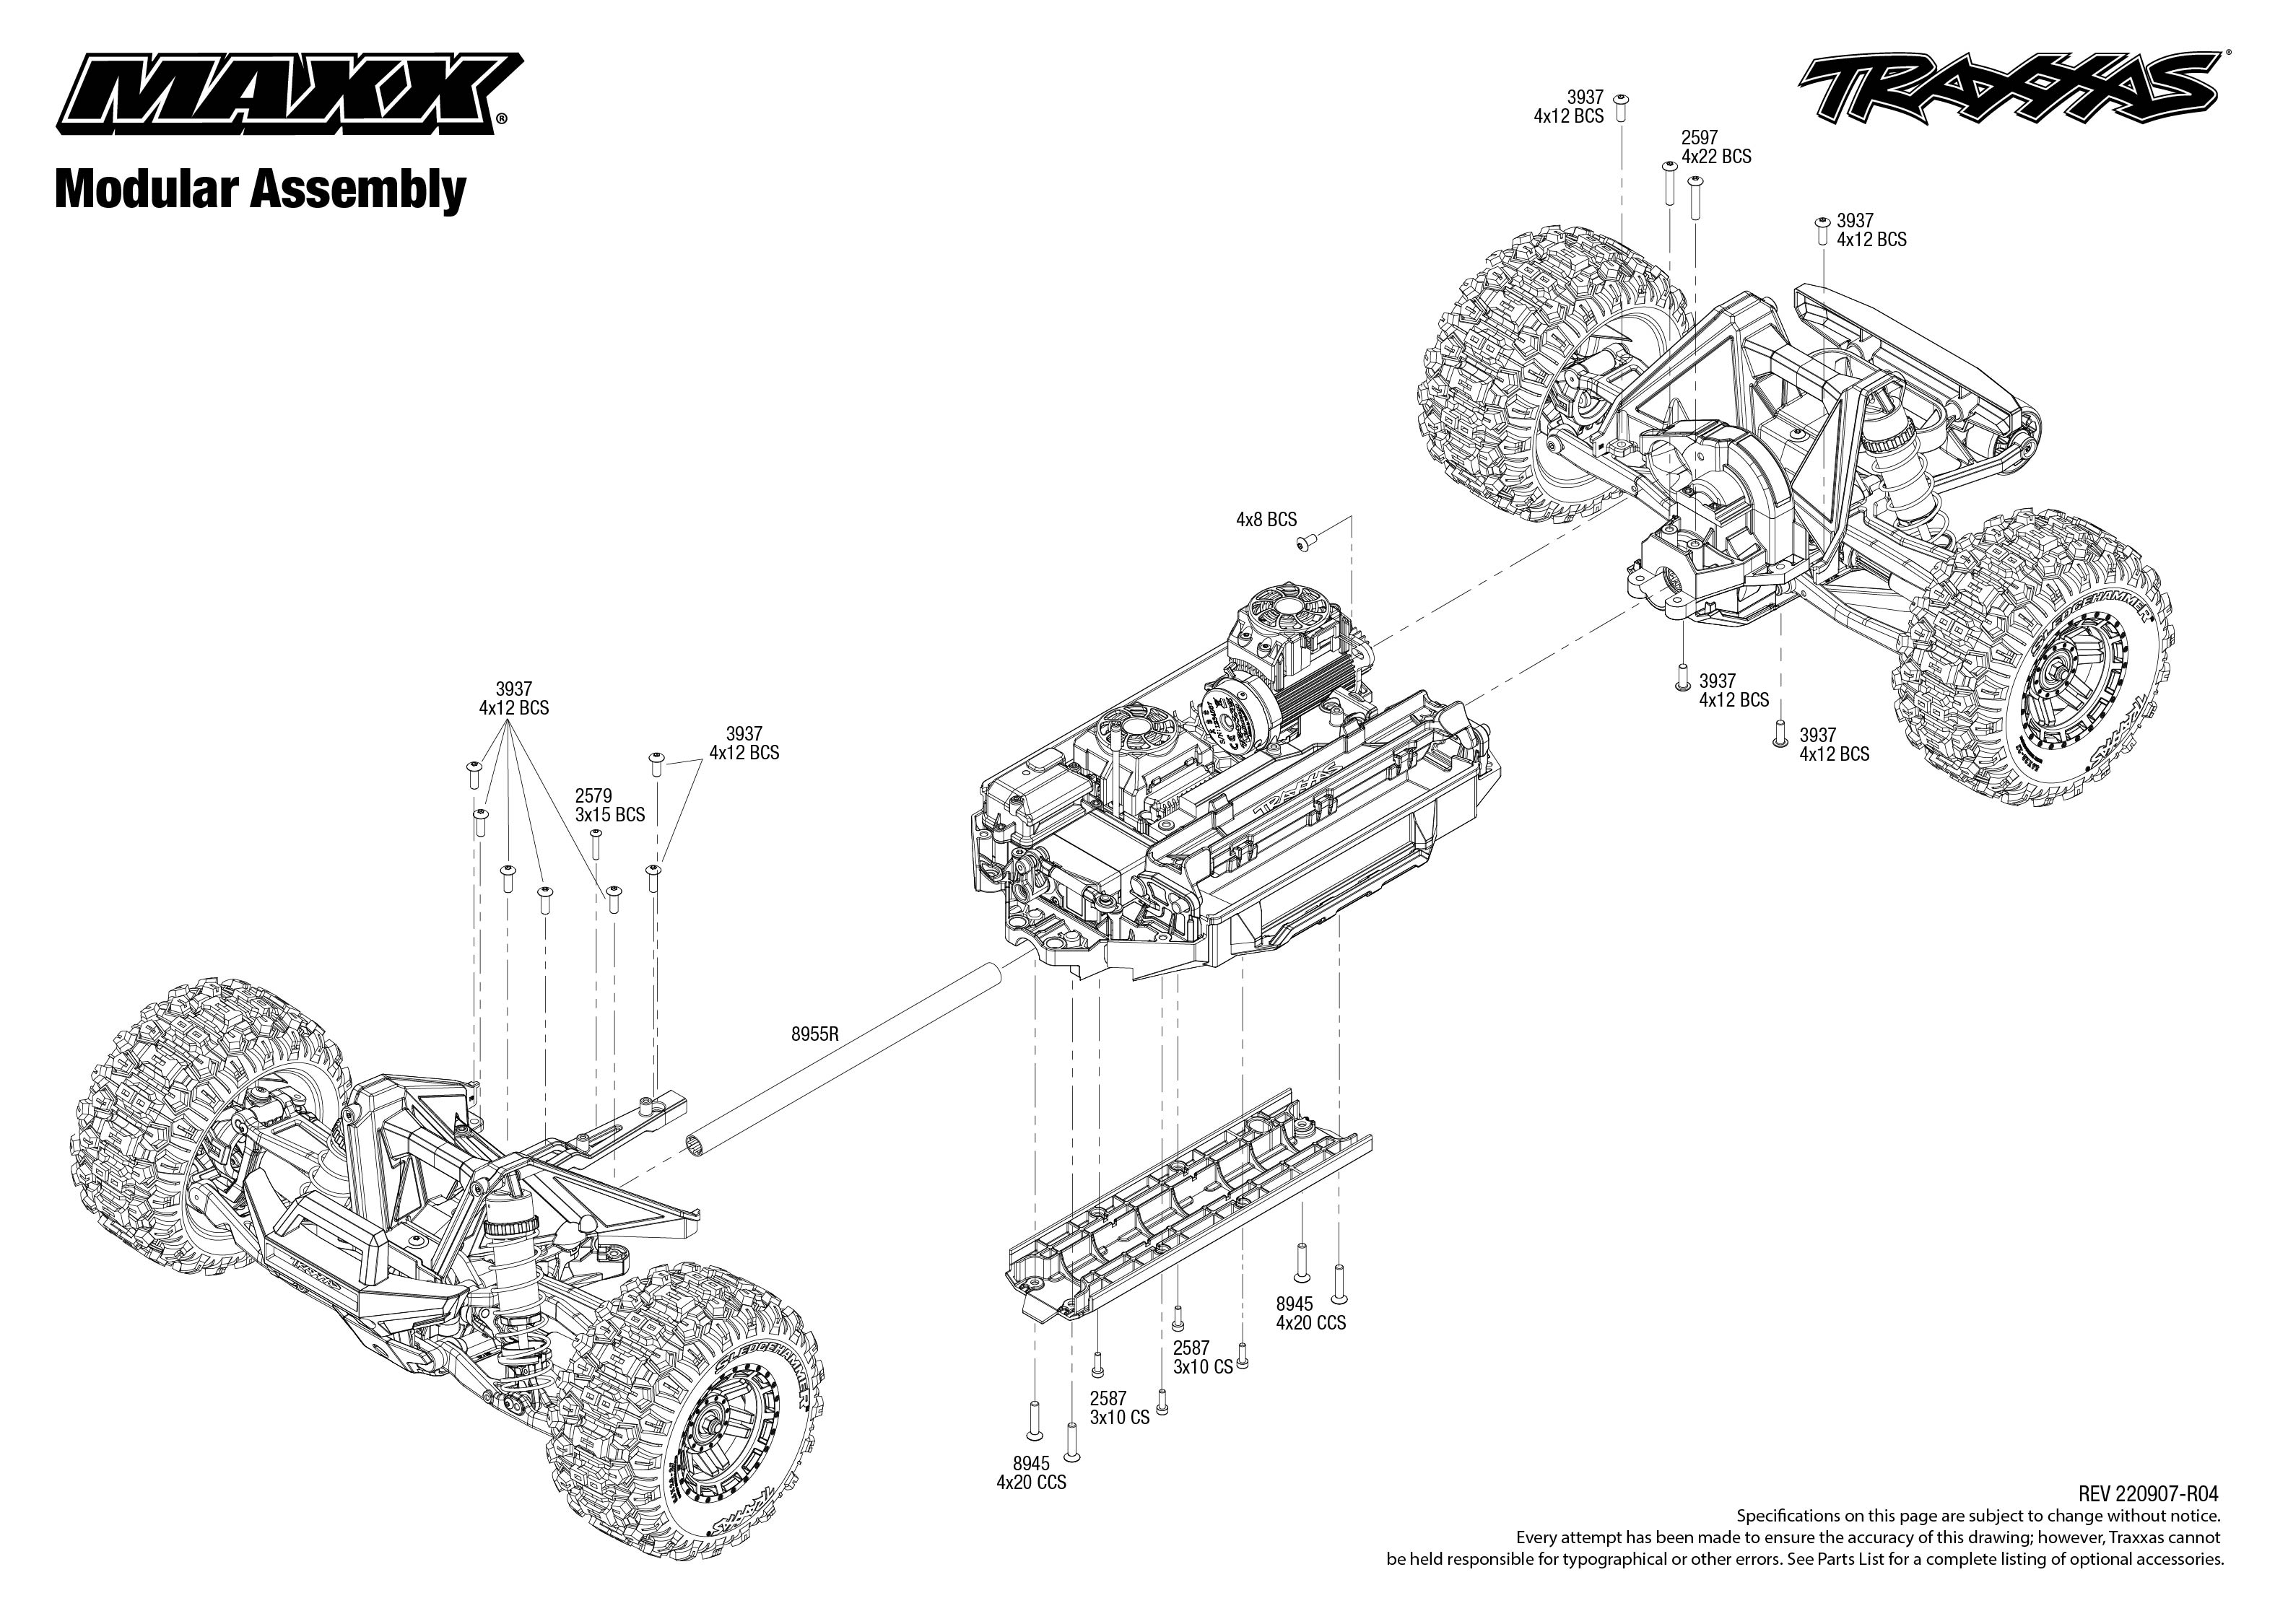 Exploded view: Traxxas Maxx 1:8 4WD TQi RTR - Modular assembly | Astra